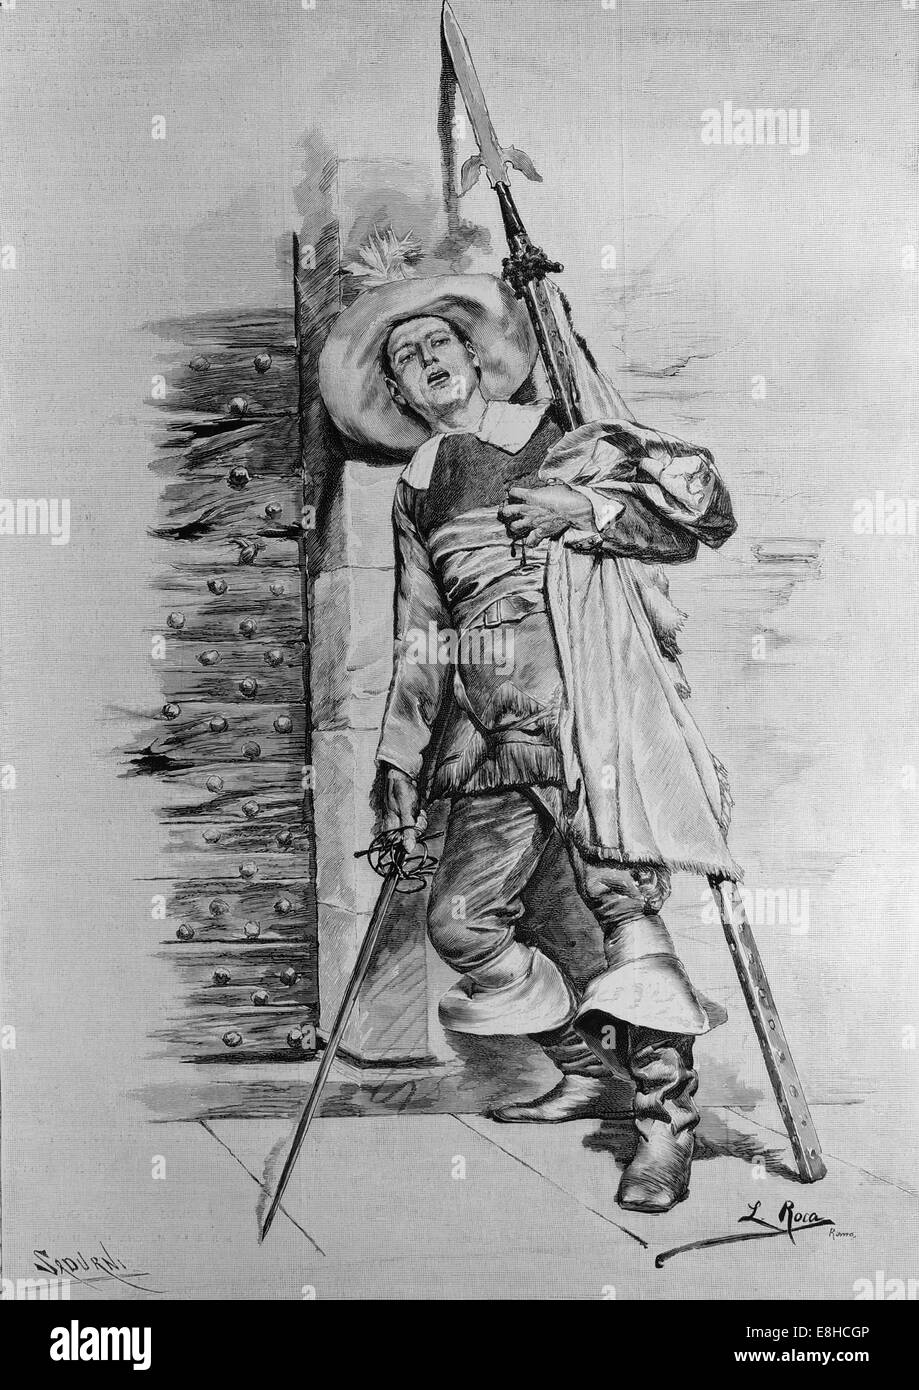 Patriotic. Soldier. Drawing by L. Roca. Engraving by Sardurni. Artistic Illustration, published in Spanish, 1885. Stock Photo